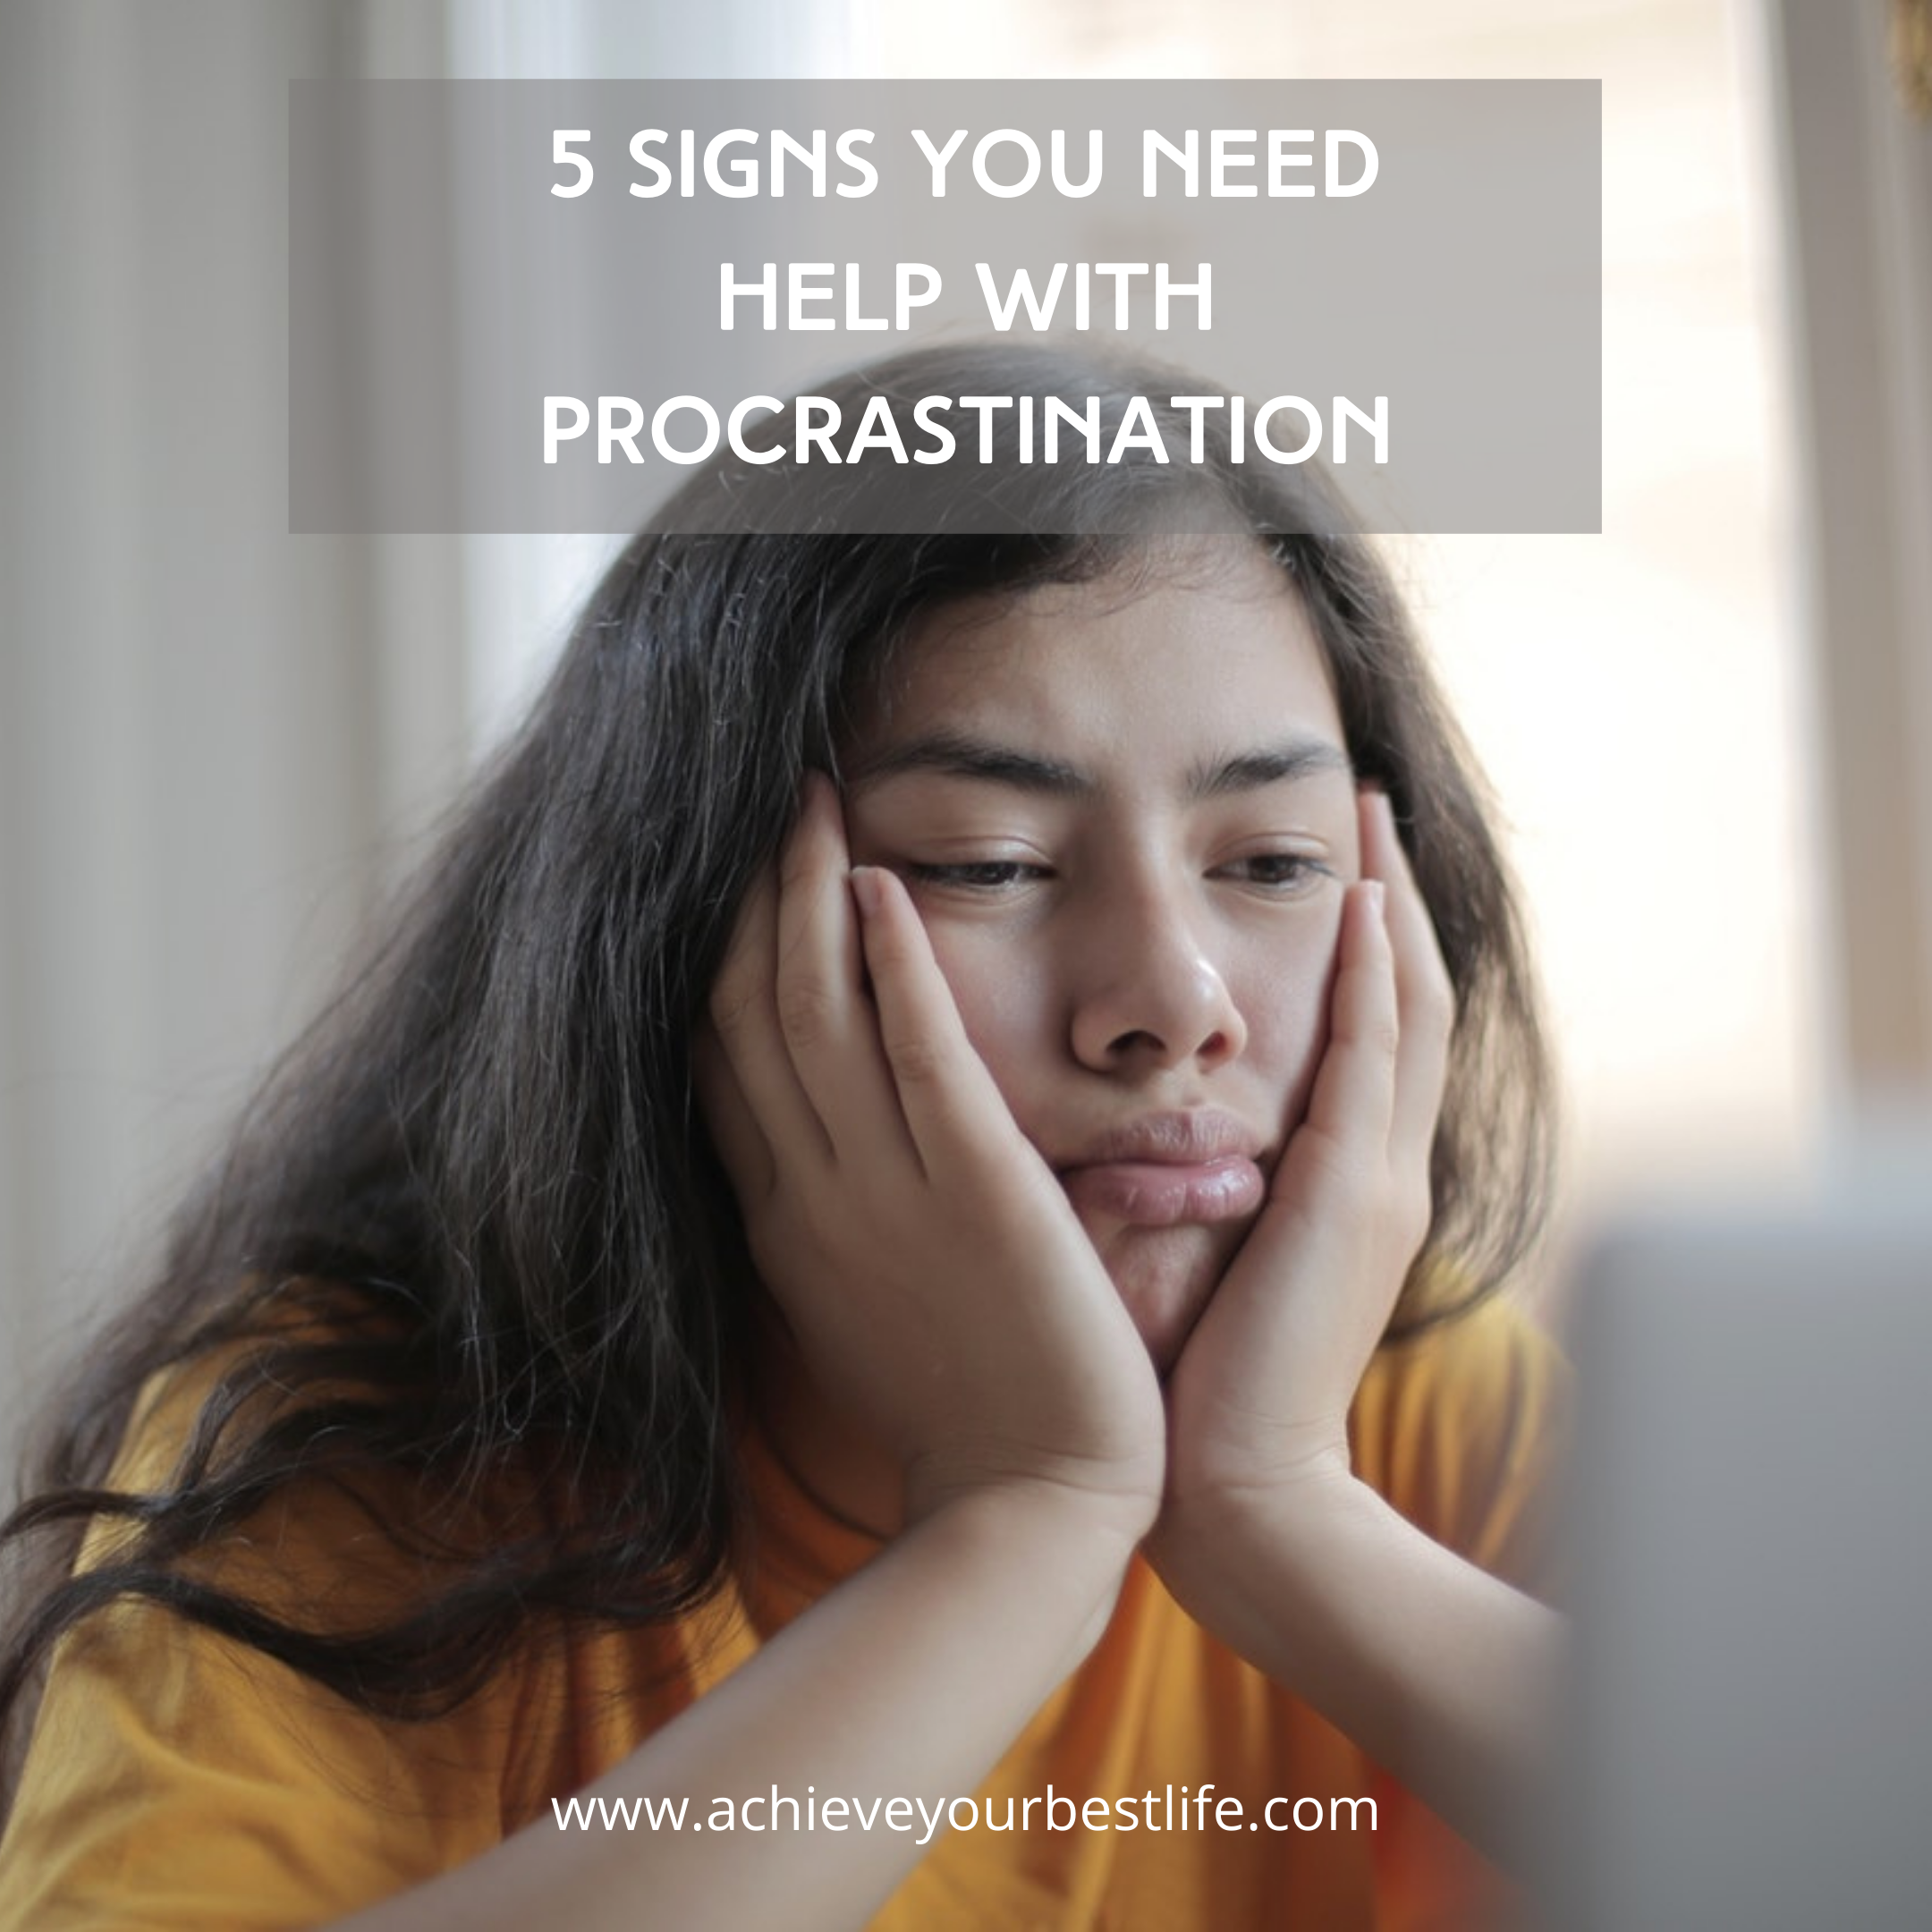 5 Signs You Need Help With Procrastination